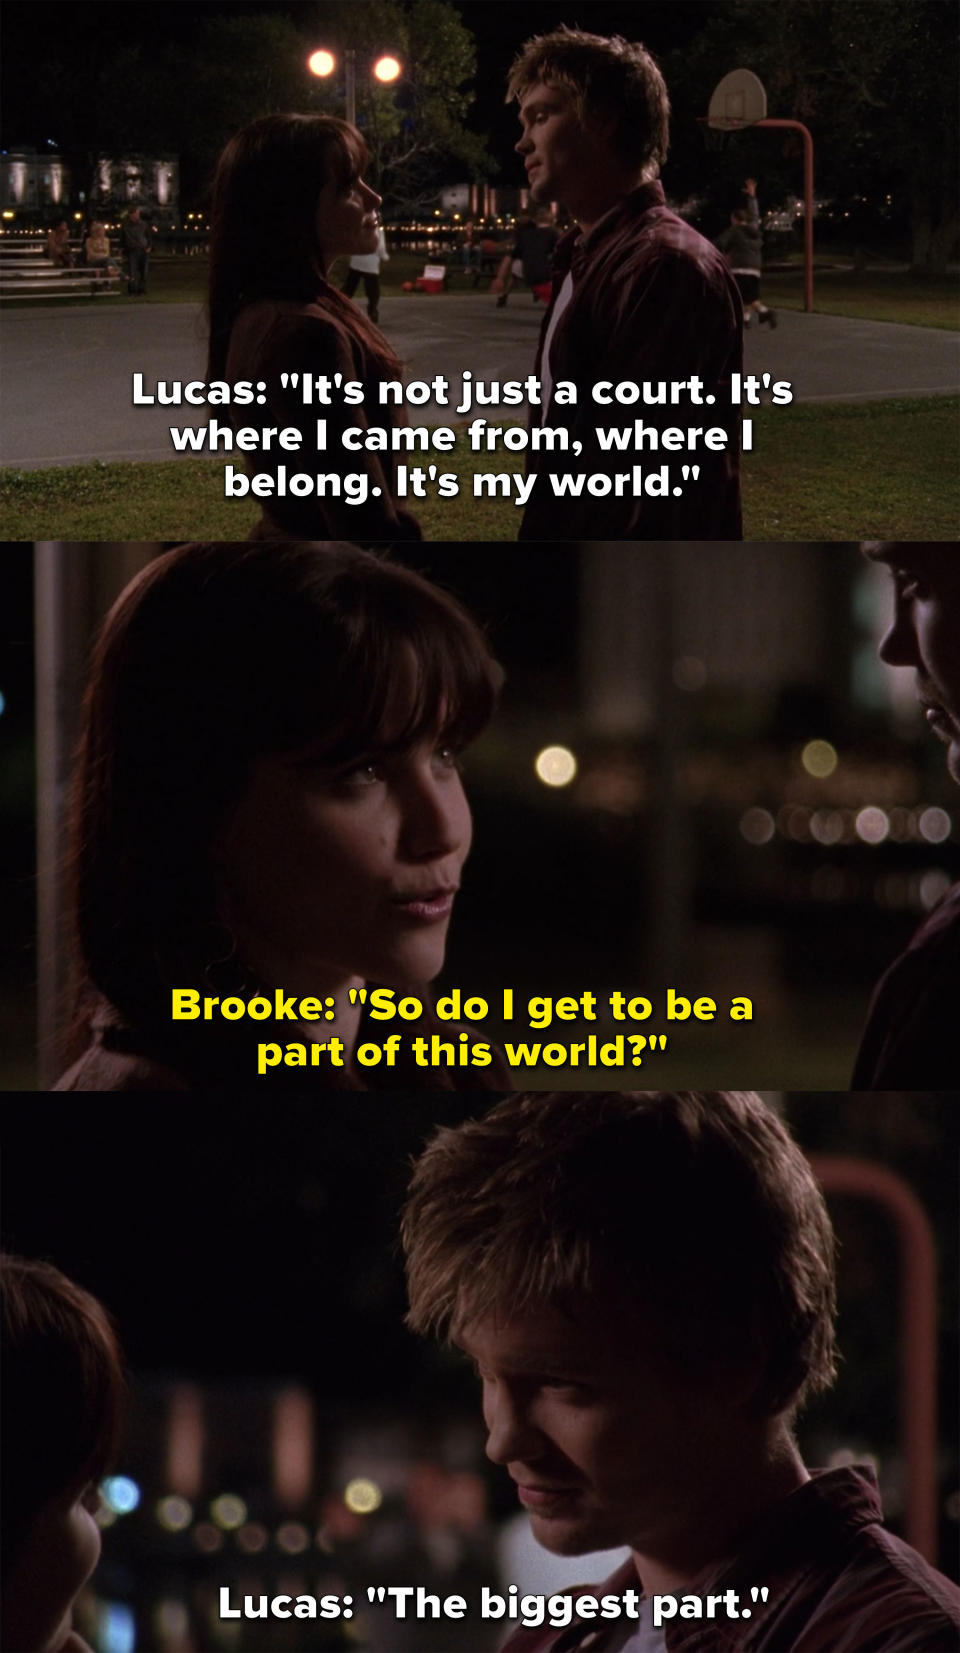 Lucas says the court is his world, Brooke asks if she gets to be a part of this world, and Lucas replies, "The biggest part"